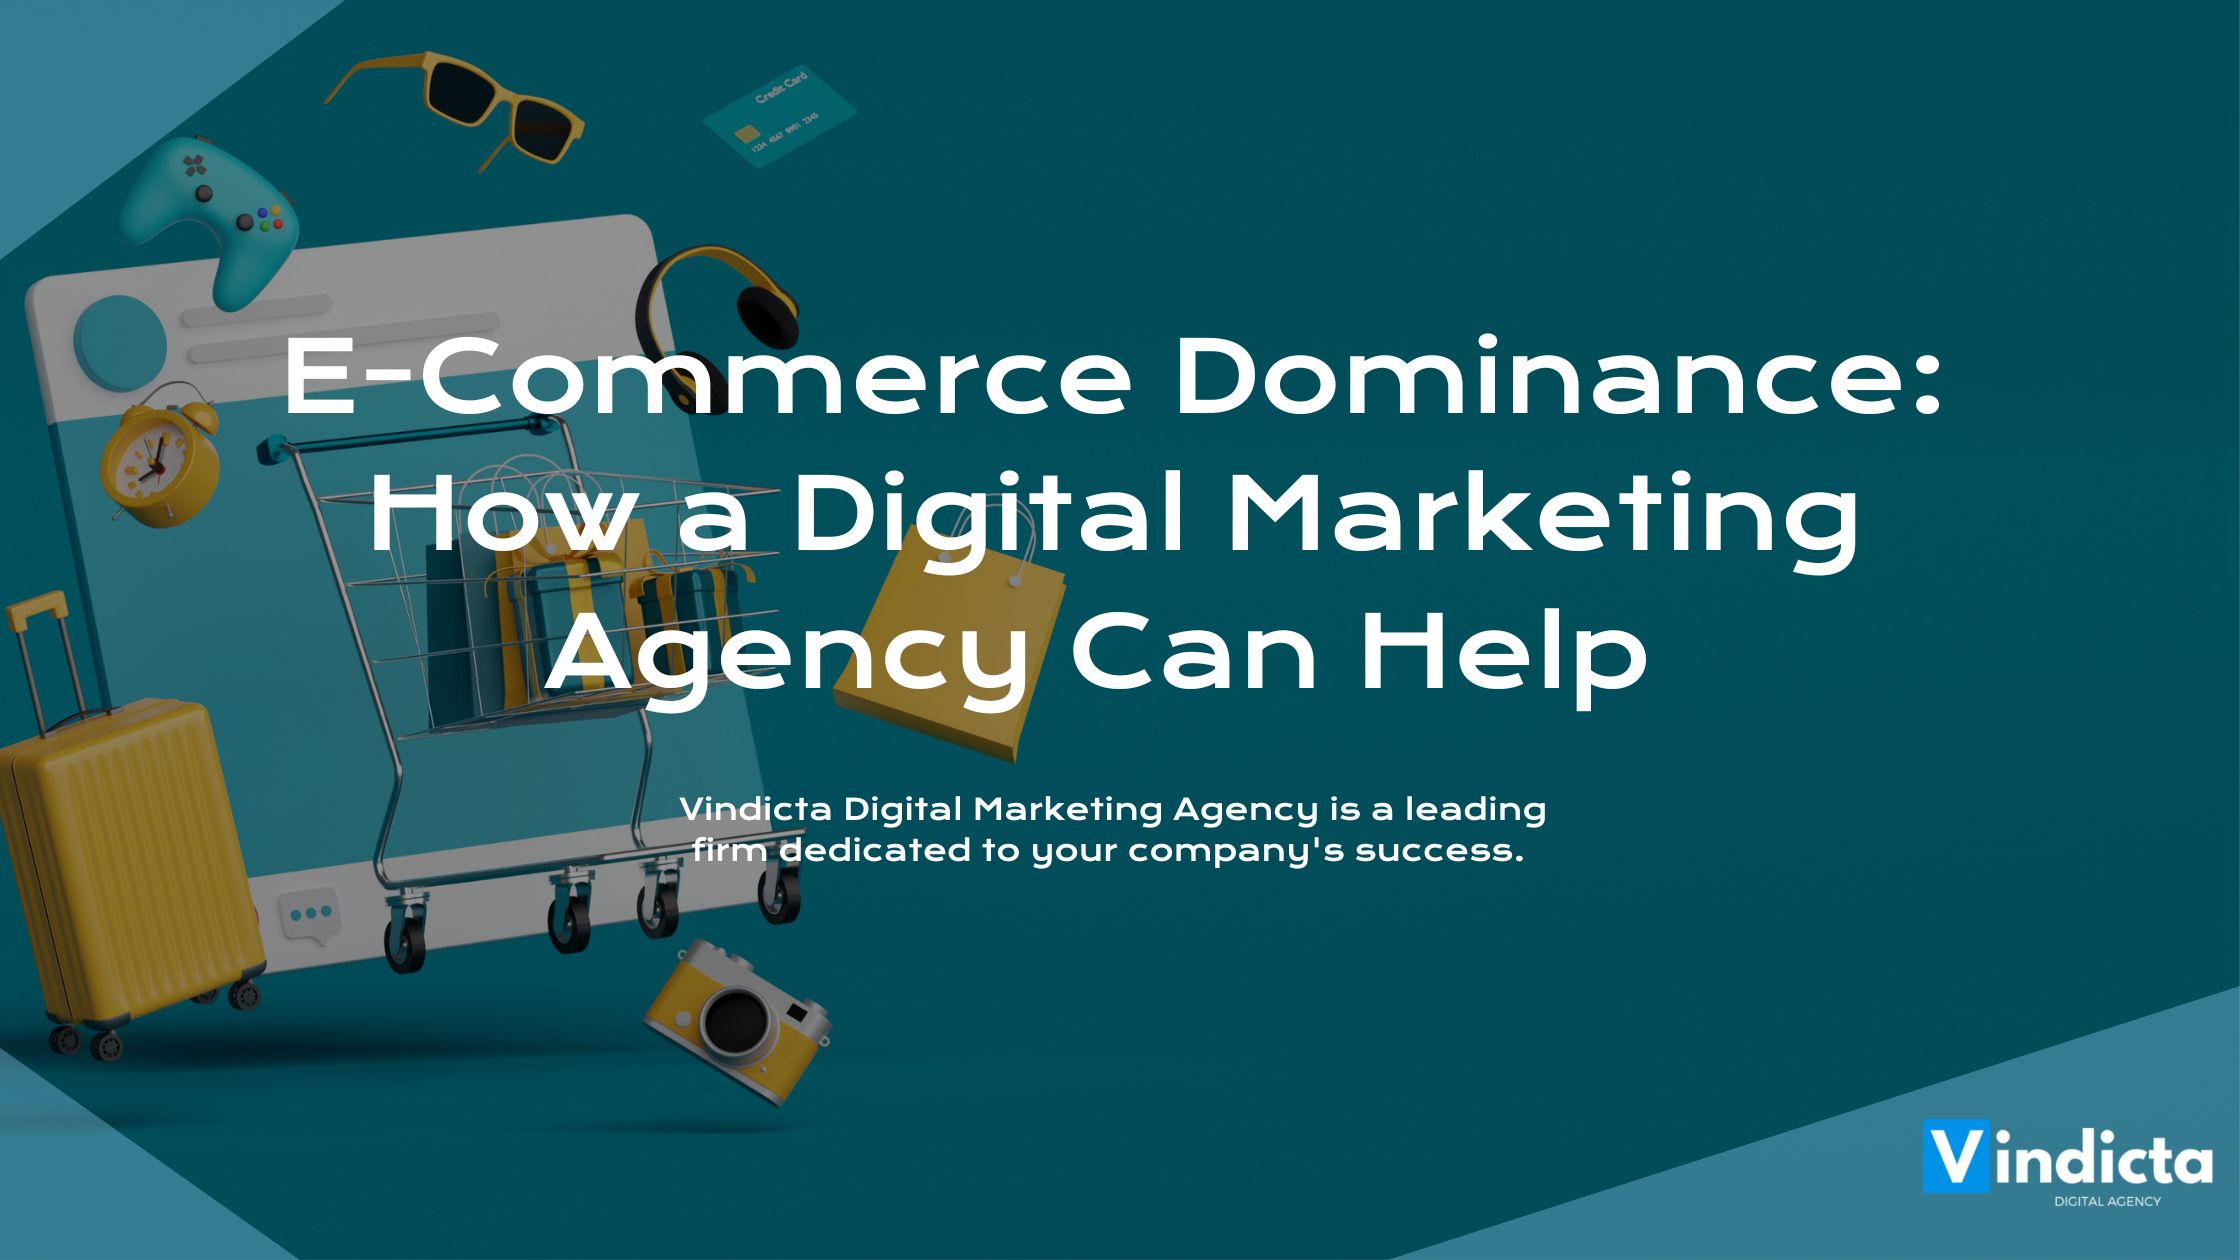 E-Commerce Dominance: How a Digital Marketing Agency Can Help